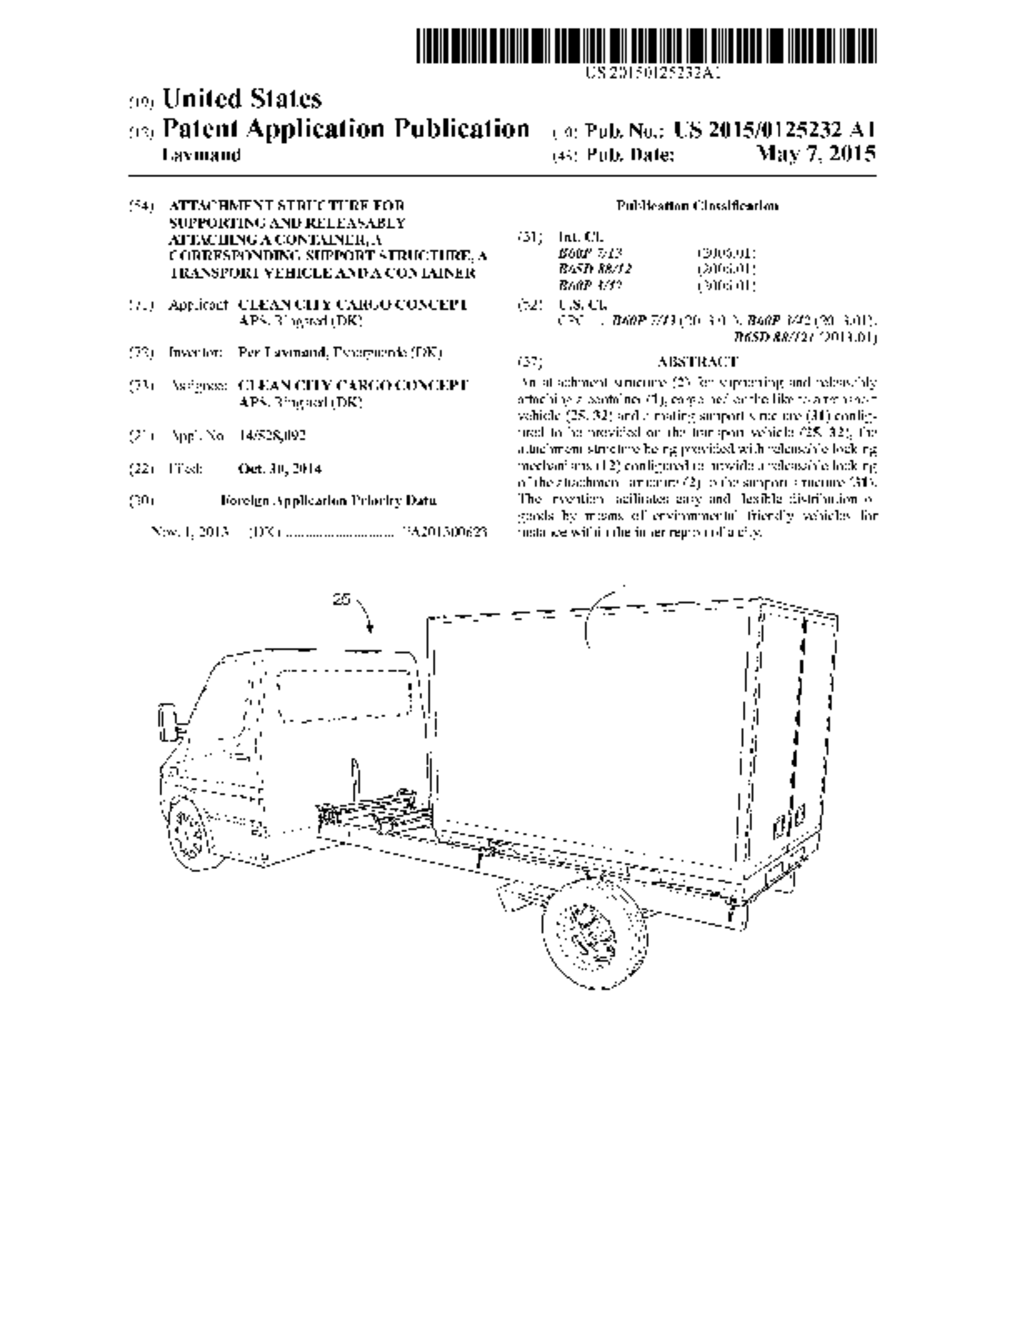 ATTACHMENT STRUCTURE FOR SUPPORTING AND RELEASABLY ATTACHING A CONTAINER,     A CORRESPONDING SUPPORT STRUCTURE, A TRANSPORT VEHICLE AND A CONTAINER - diagram, schematic, and image 01